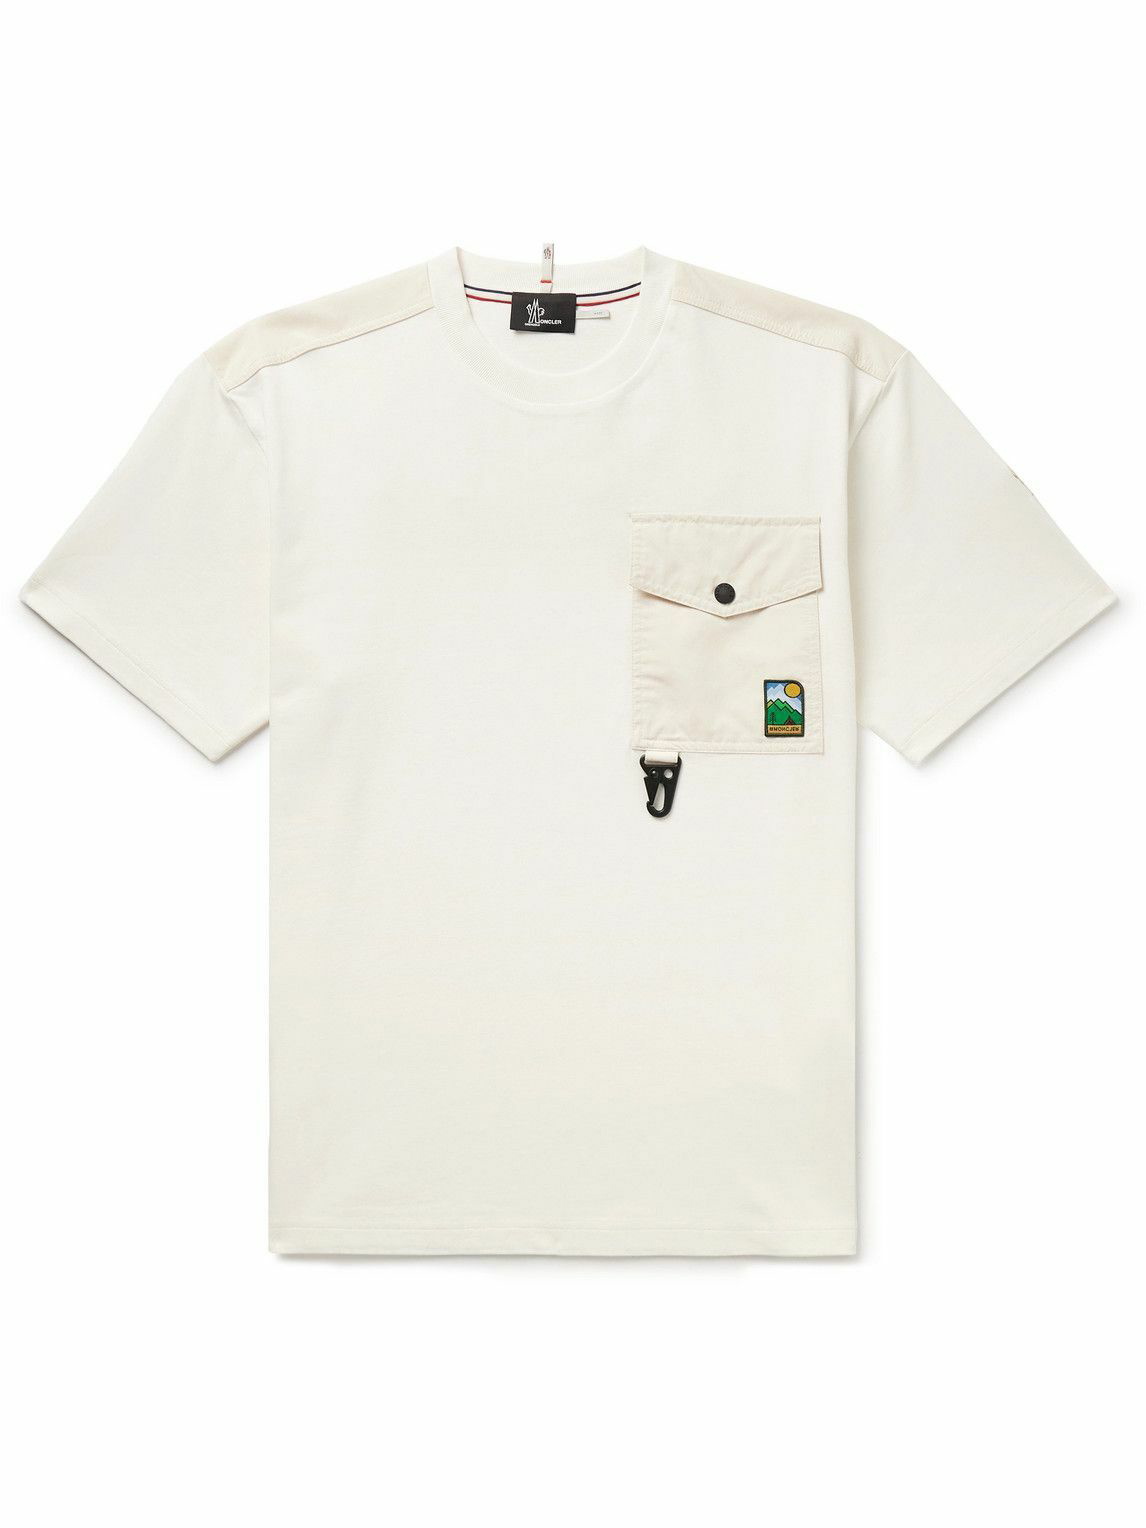 Photo: Moncler Grenoble - Logo-Appliquéd Shell-Trimmed Combed Cotton-Jersey T-Shirt - White